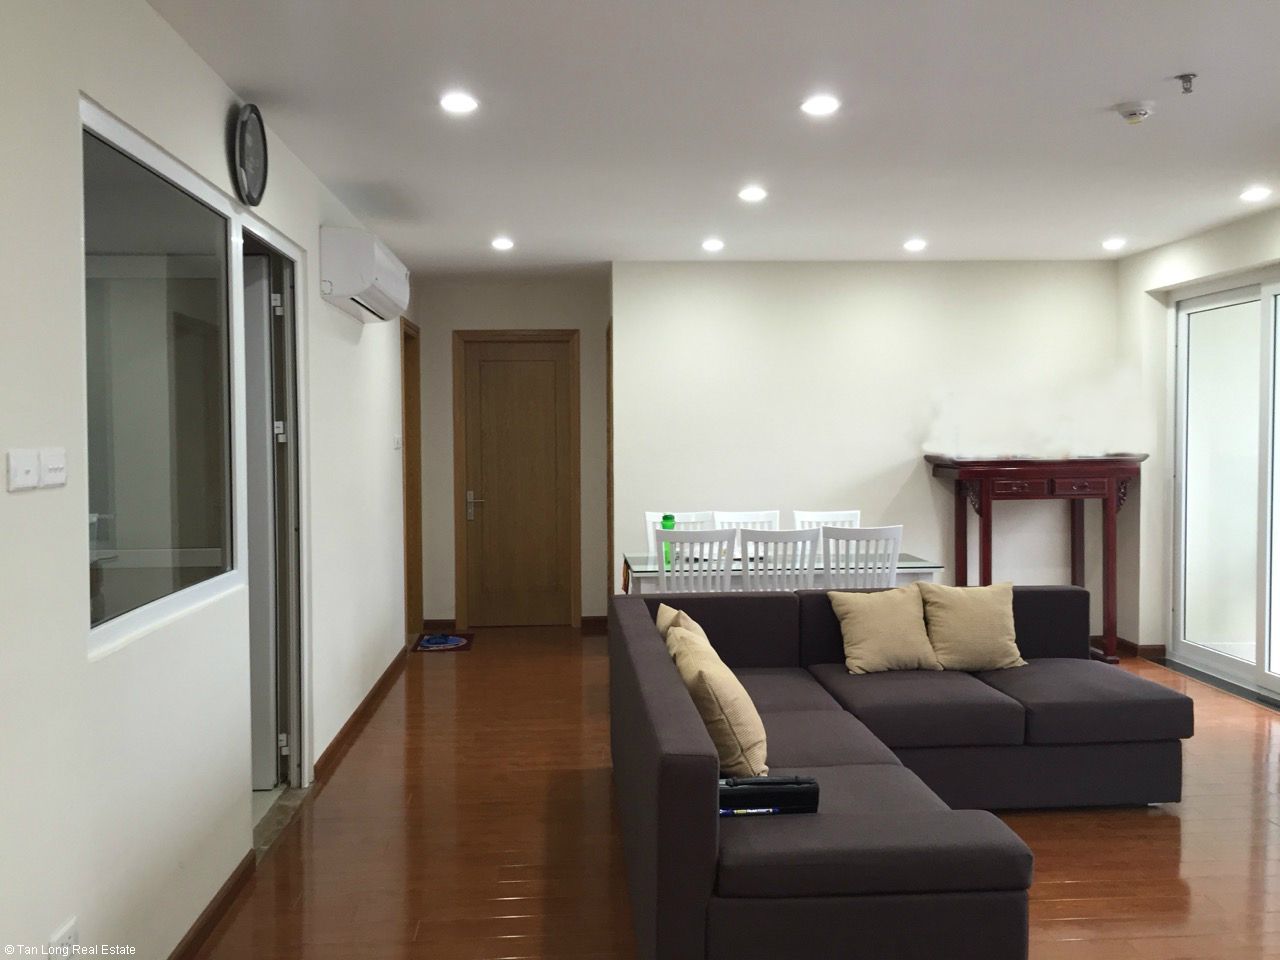 Brand new 3 bedroom furnished apartment in N04 building for rent on Hoang Dao Thuy street, Trung Hoa Nhan Chinh, Cau Giay 1